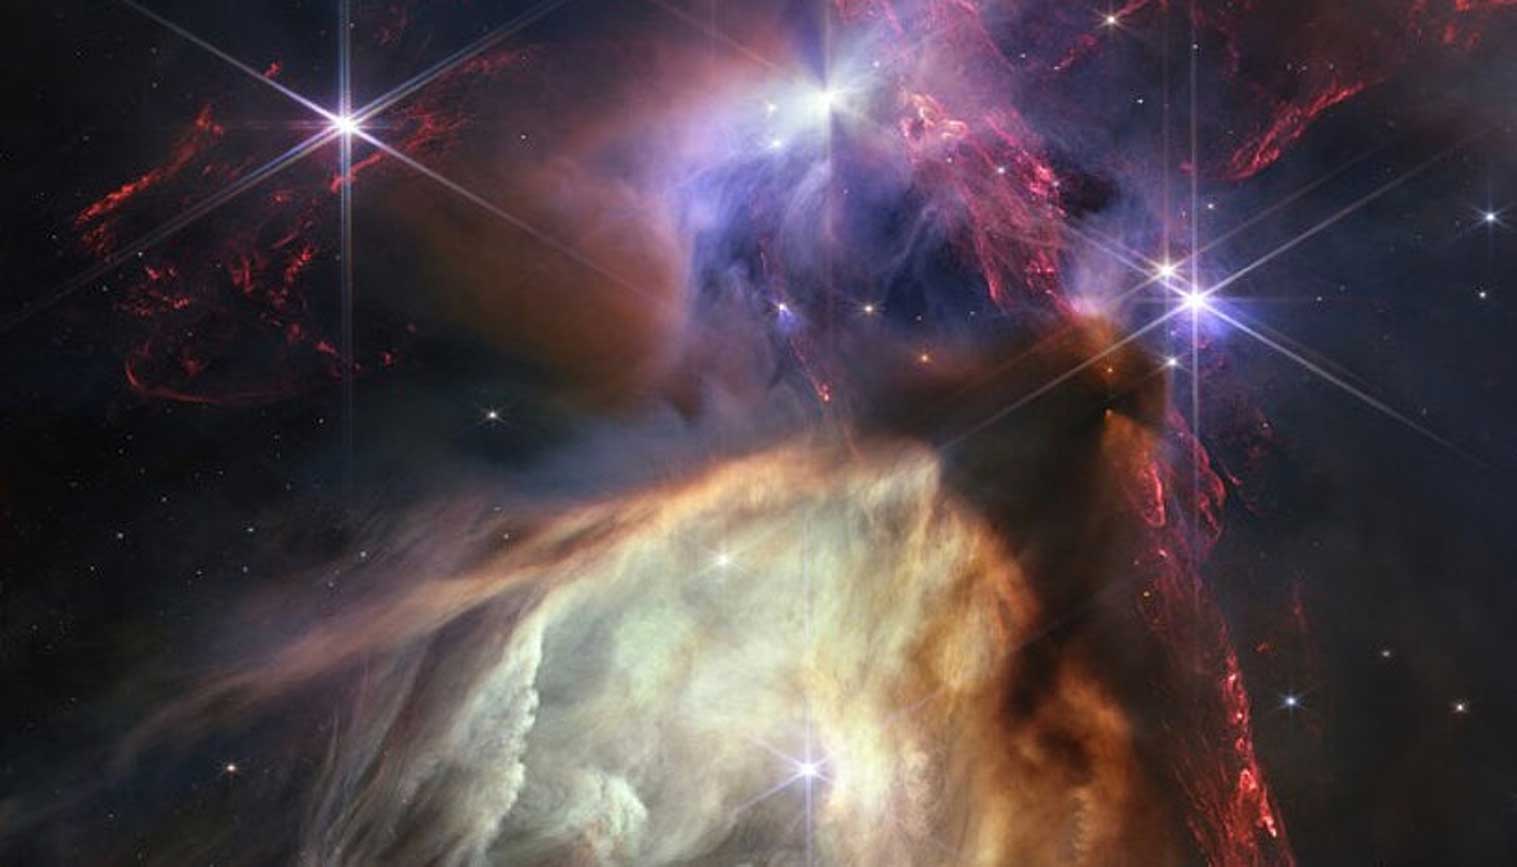 Image of the Rho Ophiuchi cloud complex